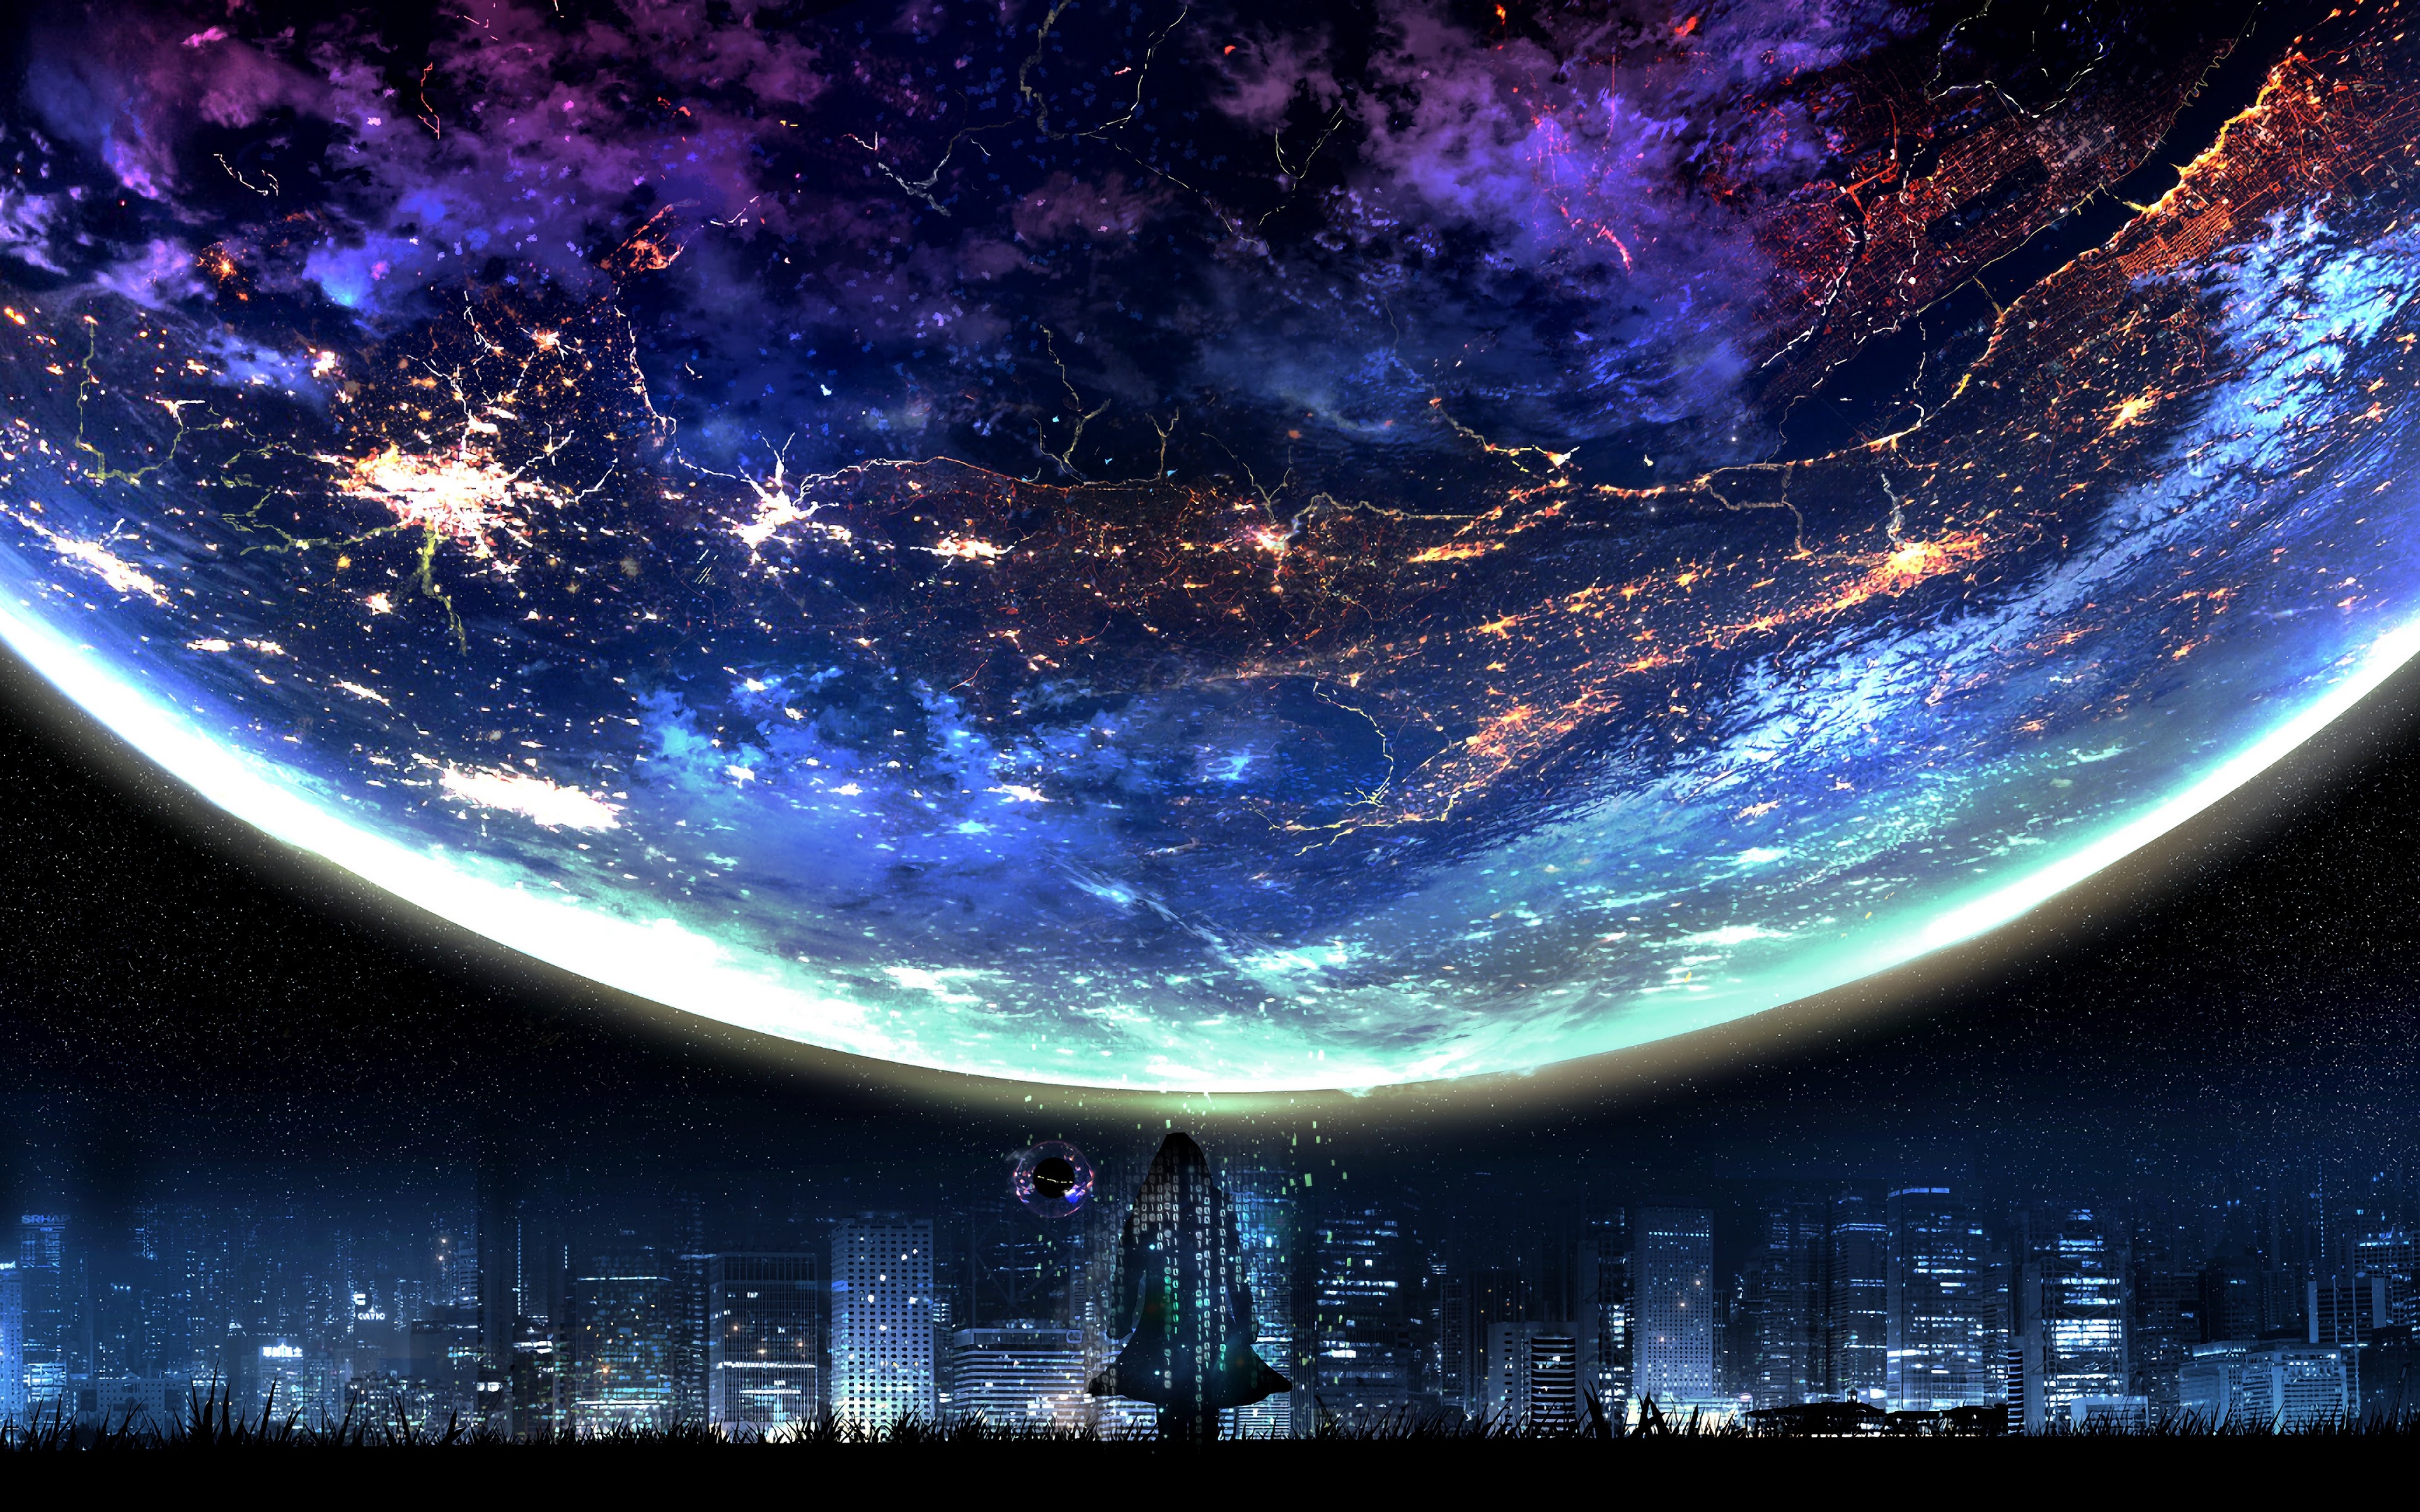 Anime wallpapers 4k ultra hd 16:10, desktop backgrounds hd, pictures and  images